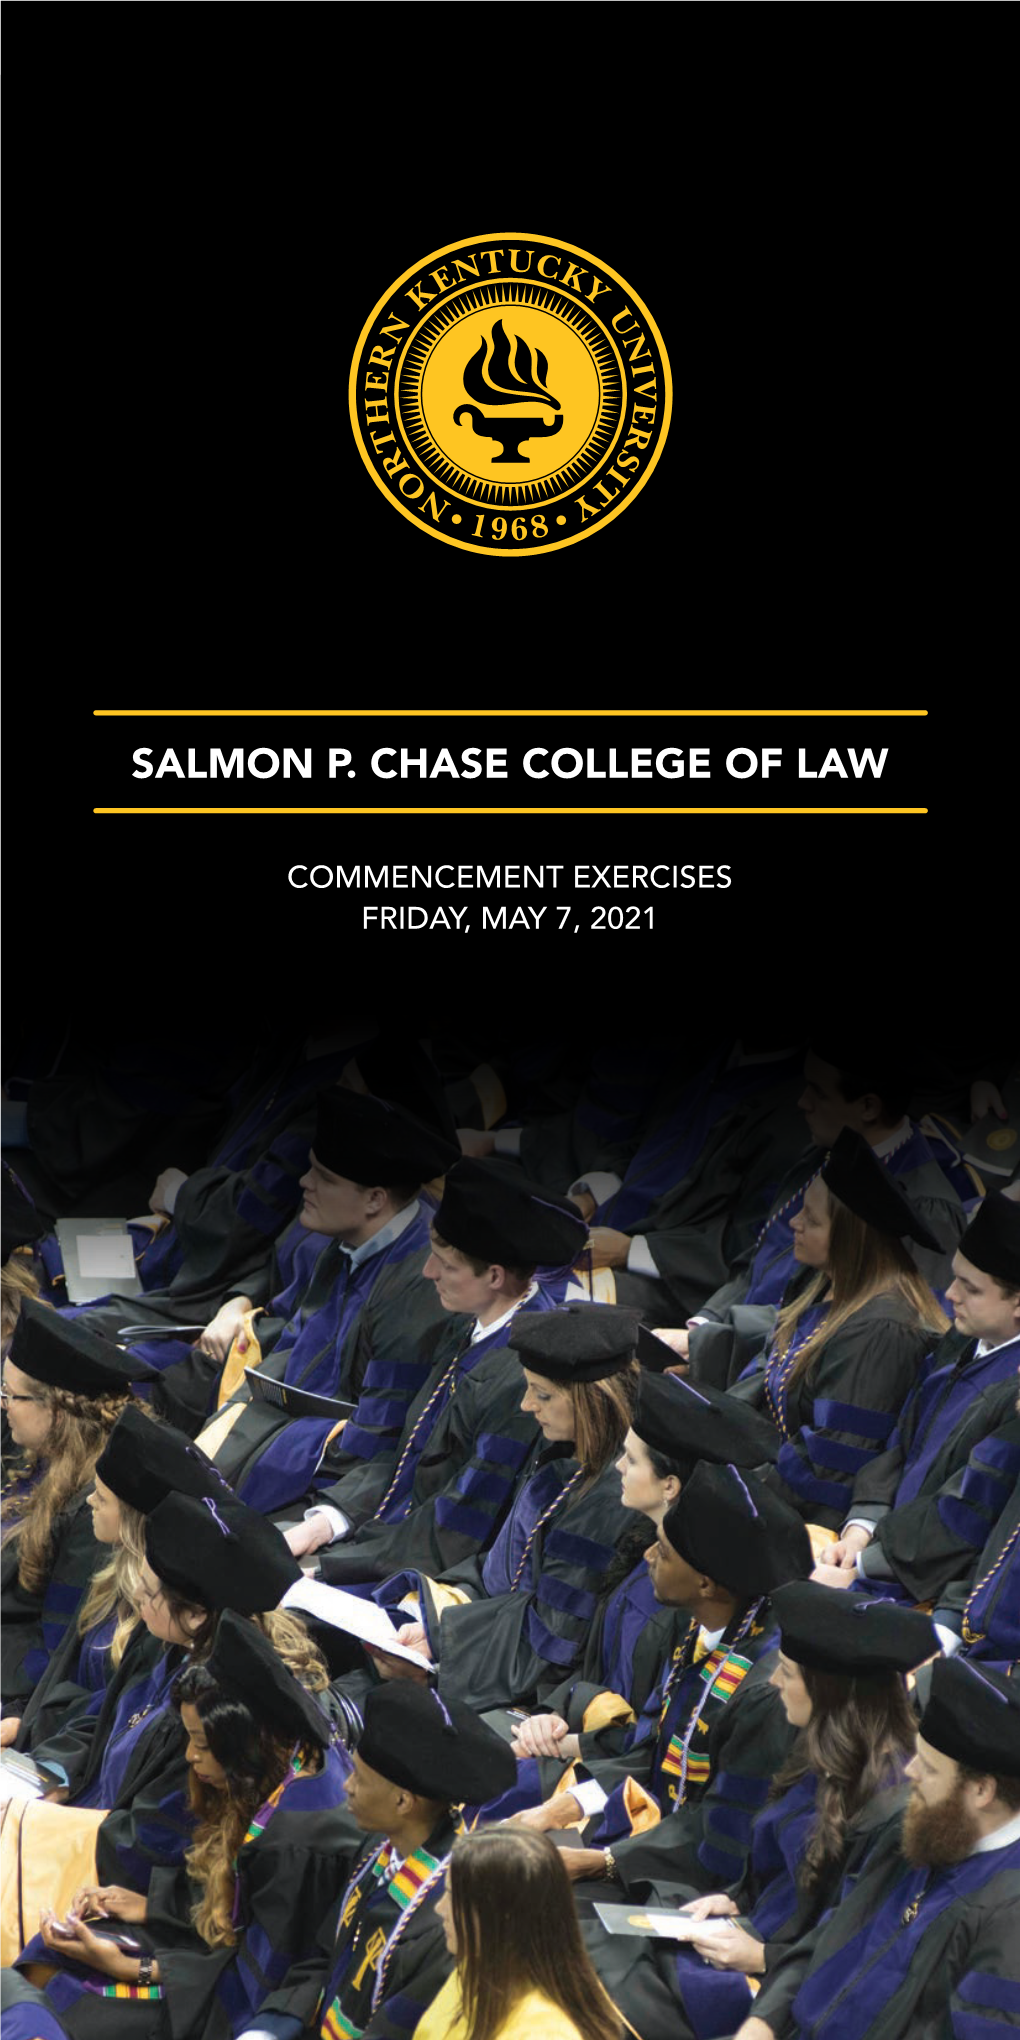 Salmon P. Chase College of Law